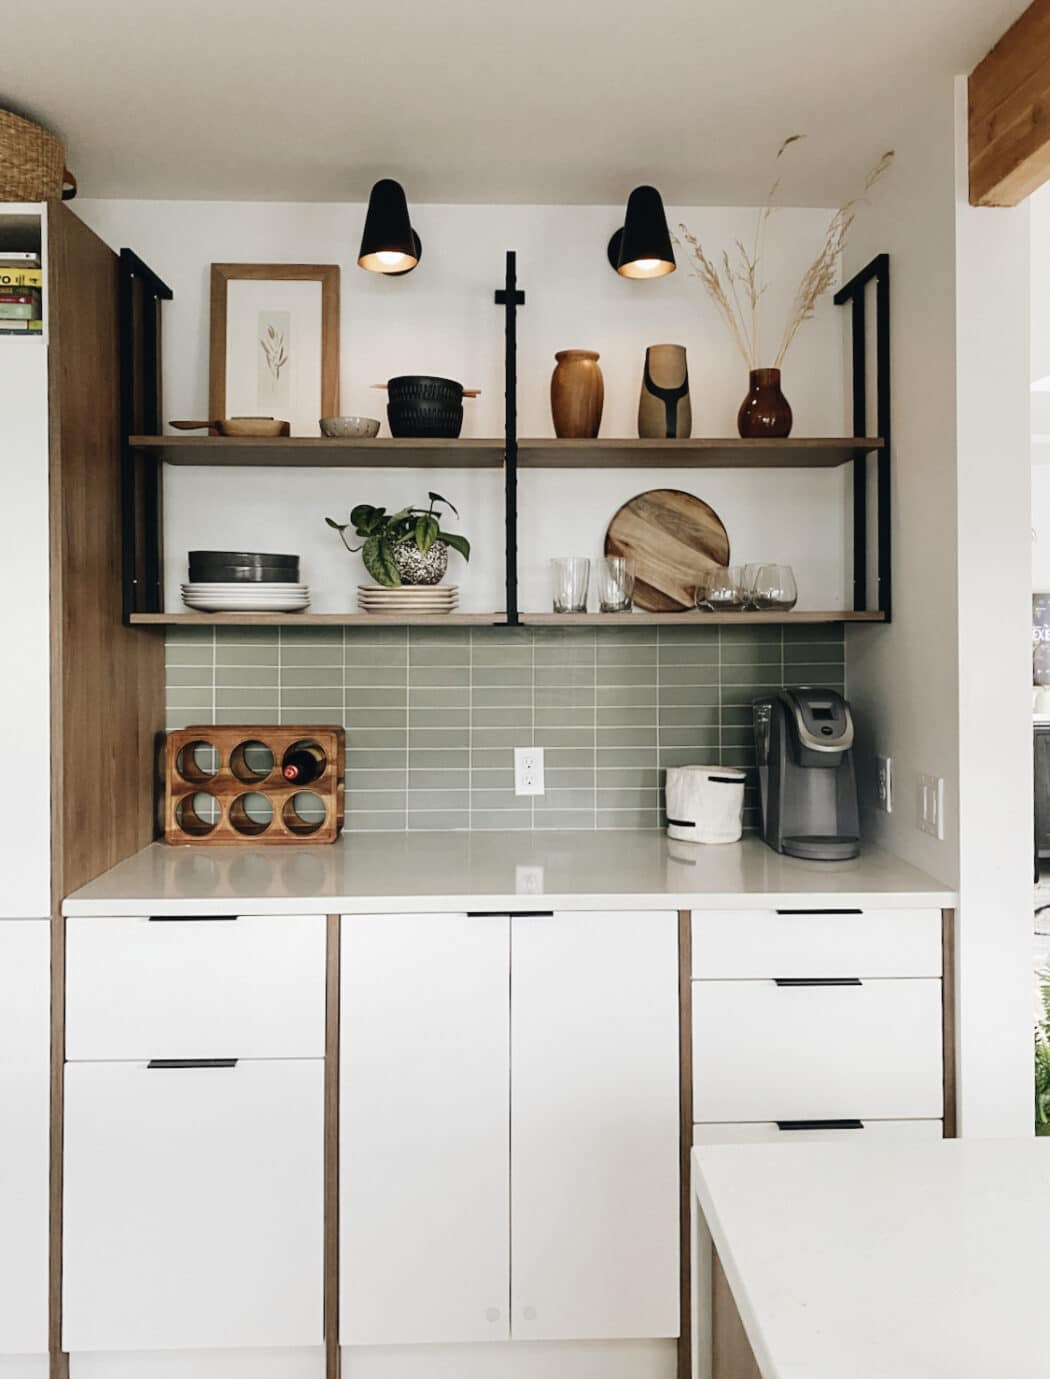 This Two-Toned Kitchen Was Inspired by Norwegian Design